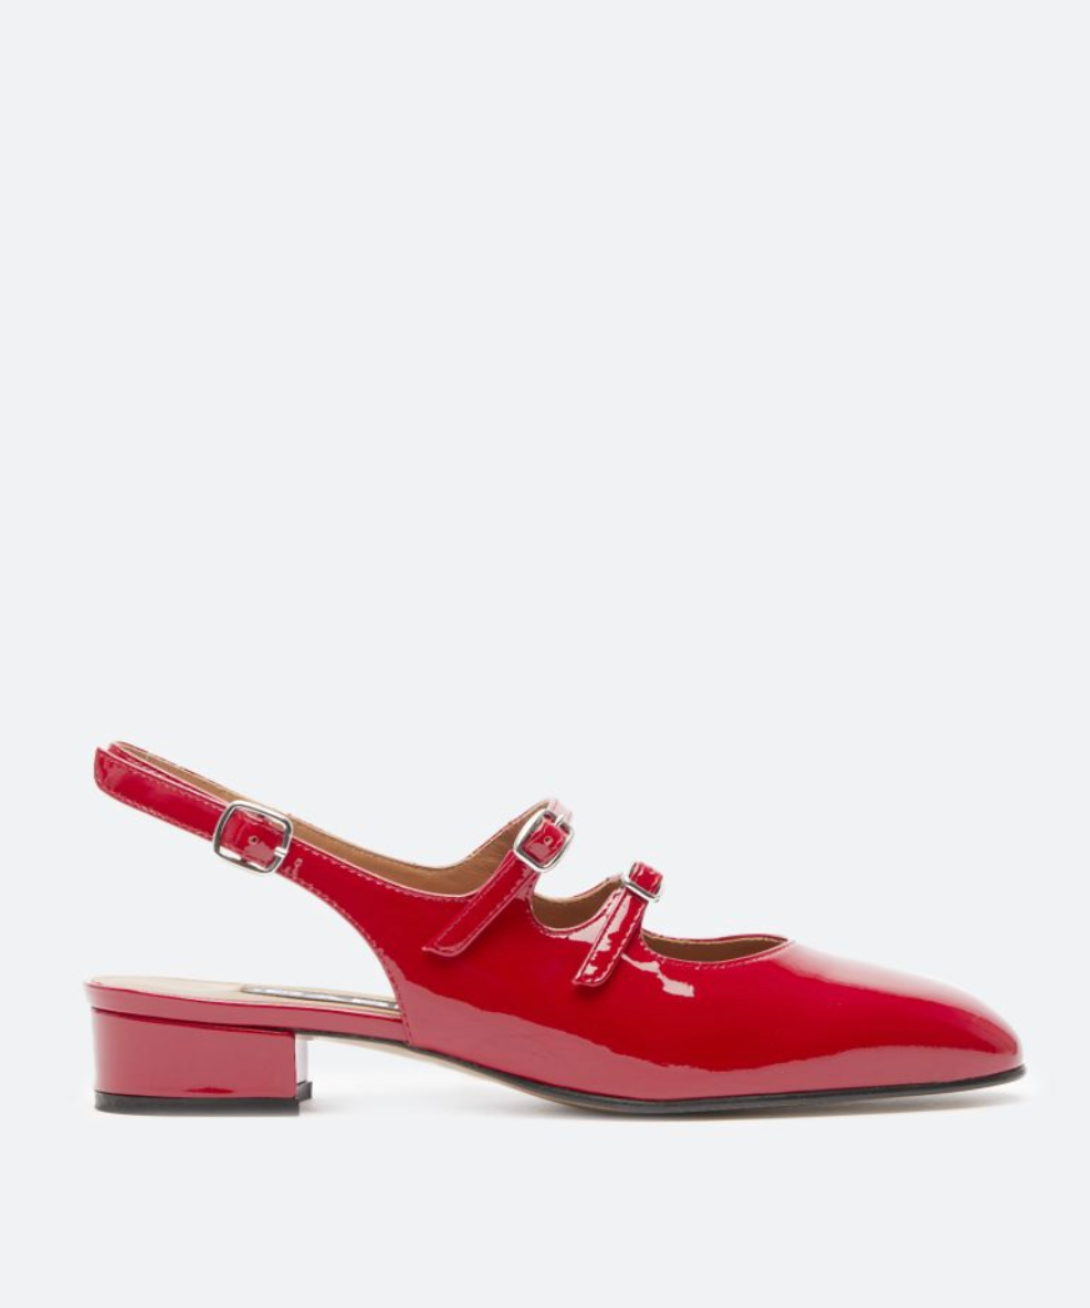 Carel + PECHE Red patent leather slingback Mary Janes